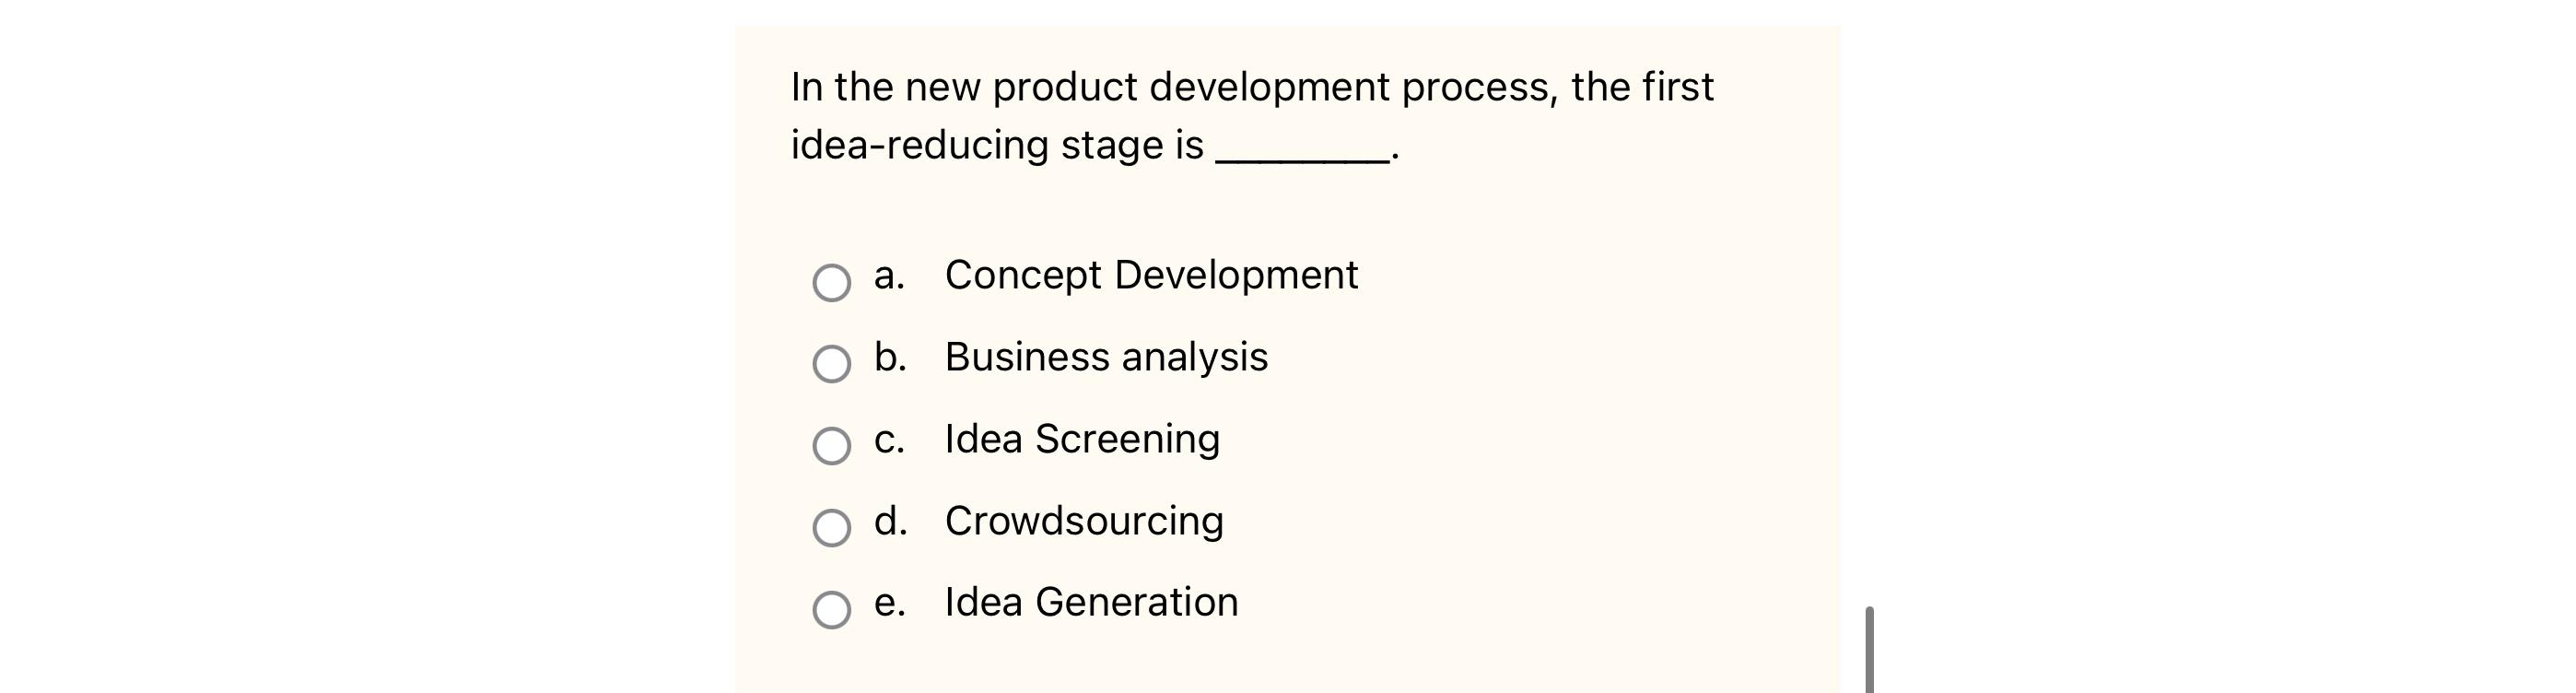 In the new product development process, the first idea-reducing stage is a. Concept Development b. Business